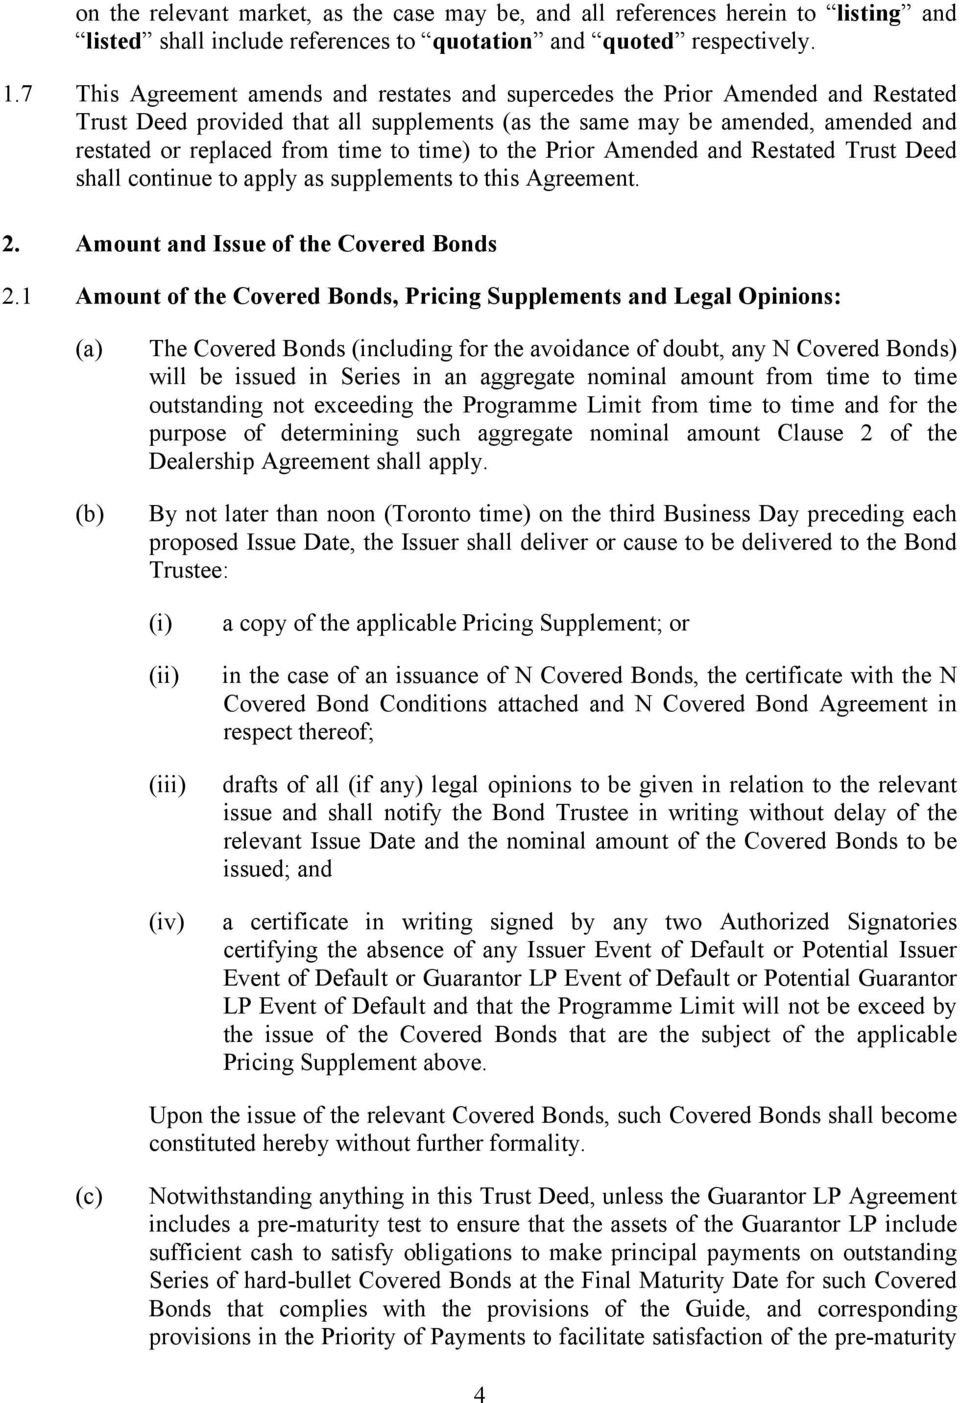 time) to the Prior Amended and Restated Trust Deed shall continue to apply as supplements to this Agreement. 2. Amount and Issue of the Covered Bonds 2.